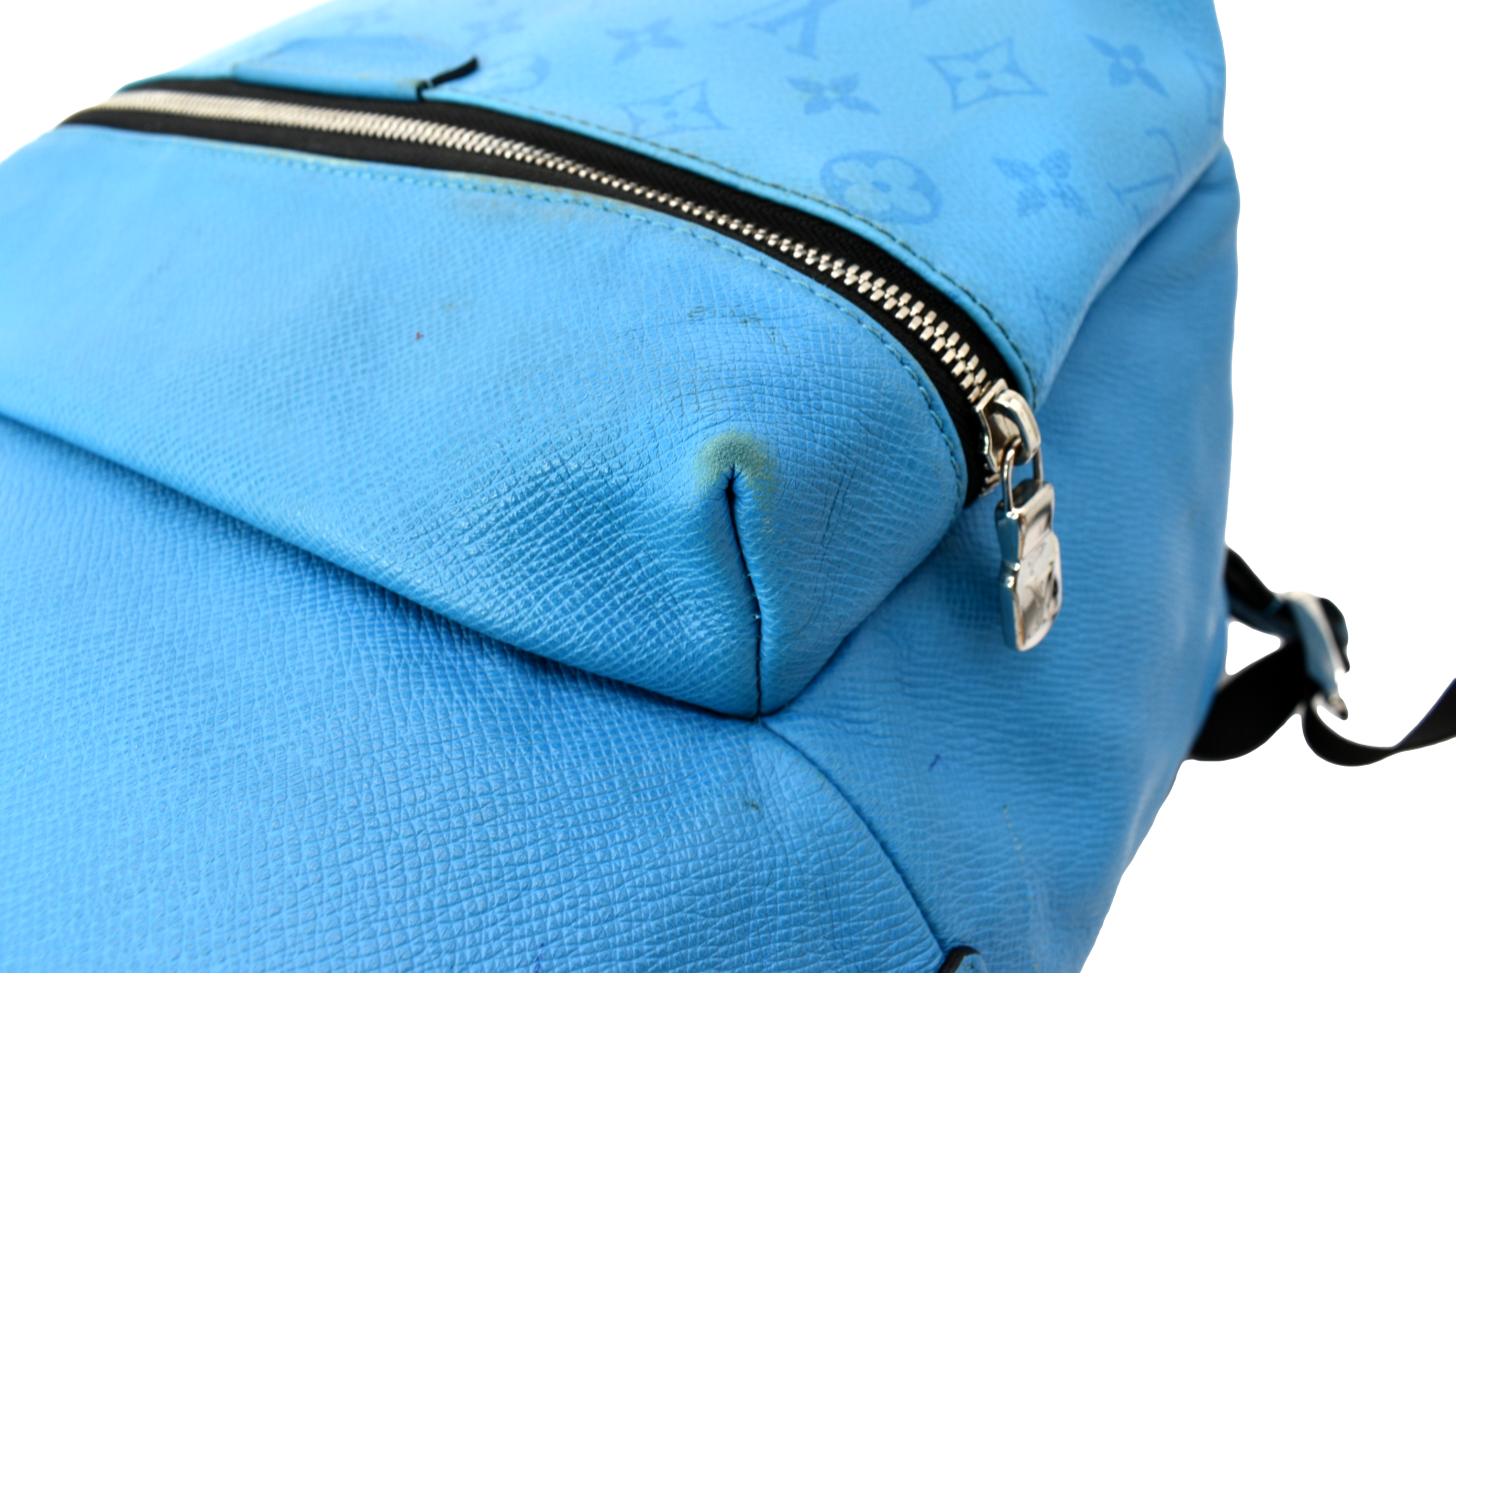 Leather backpack Louis Vuitton Blue in Leather - 34840306